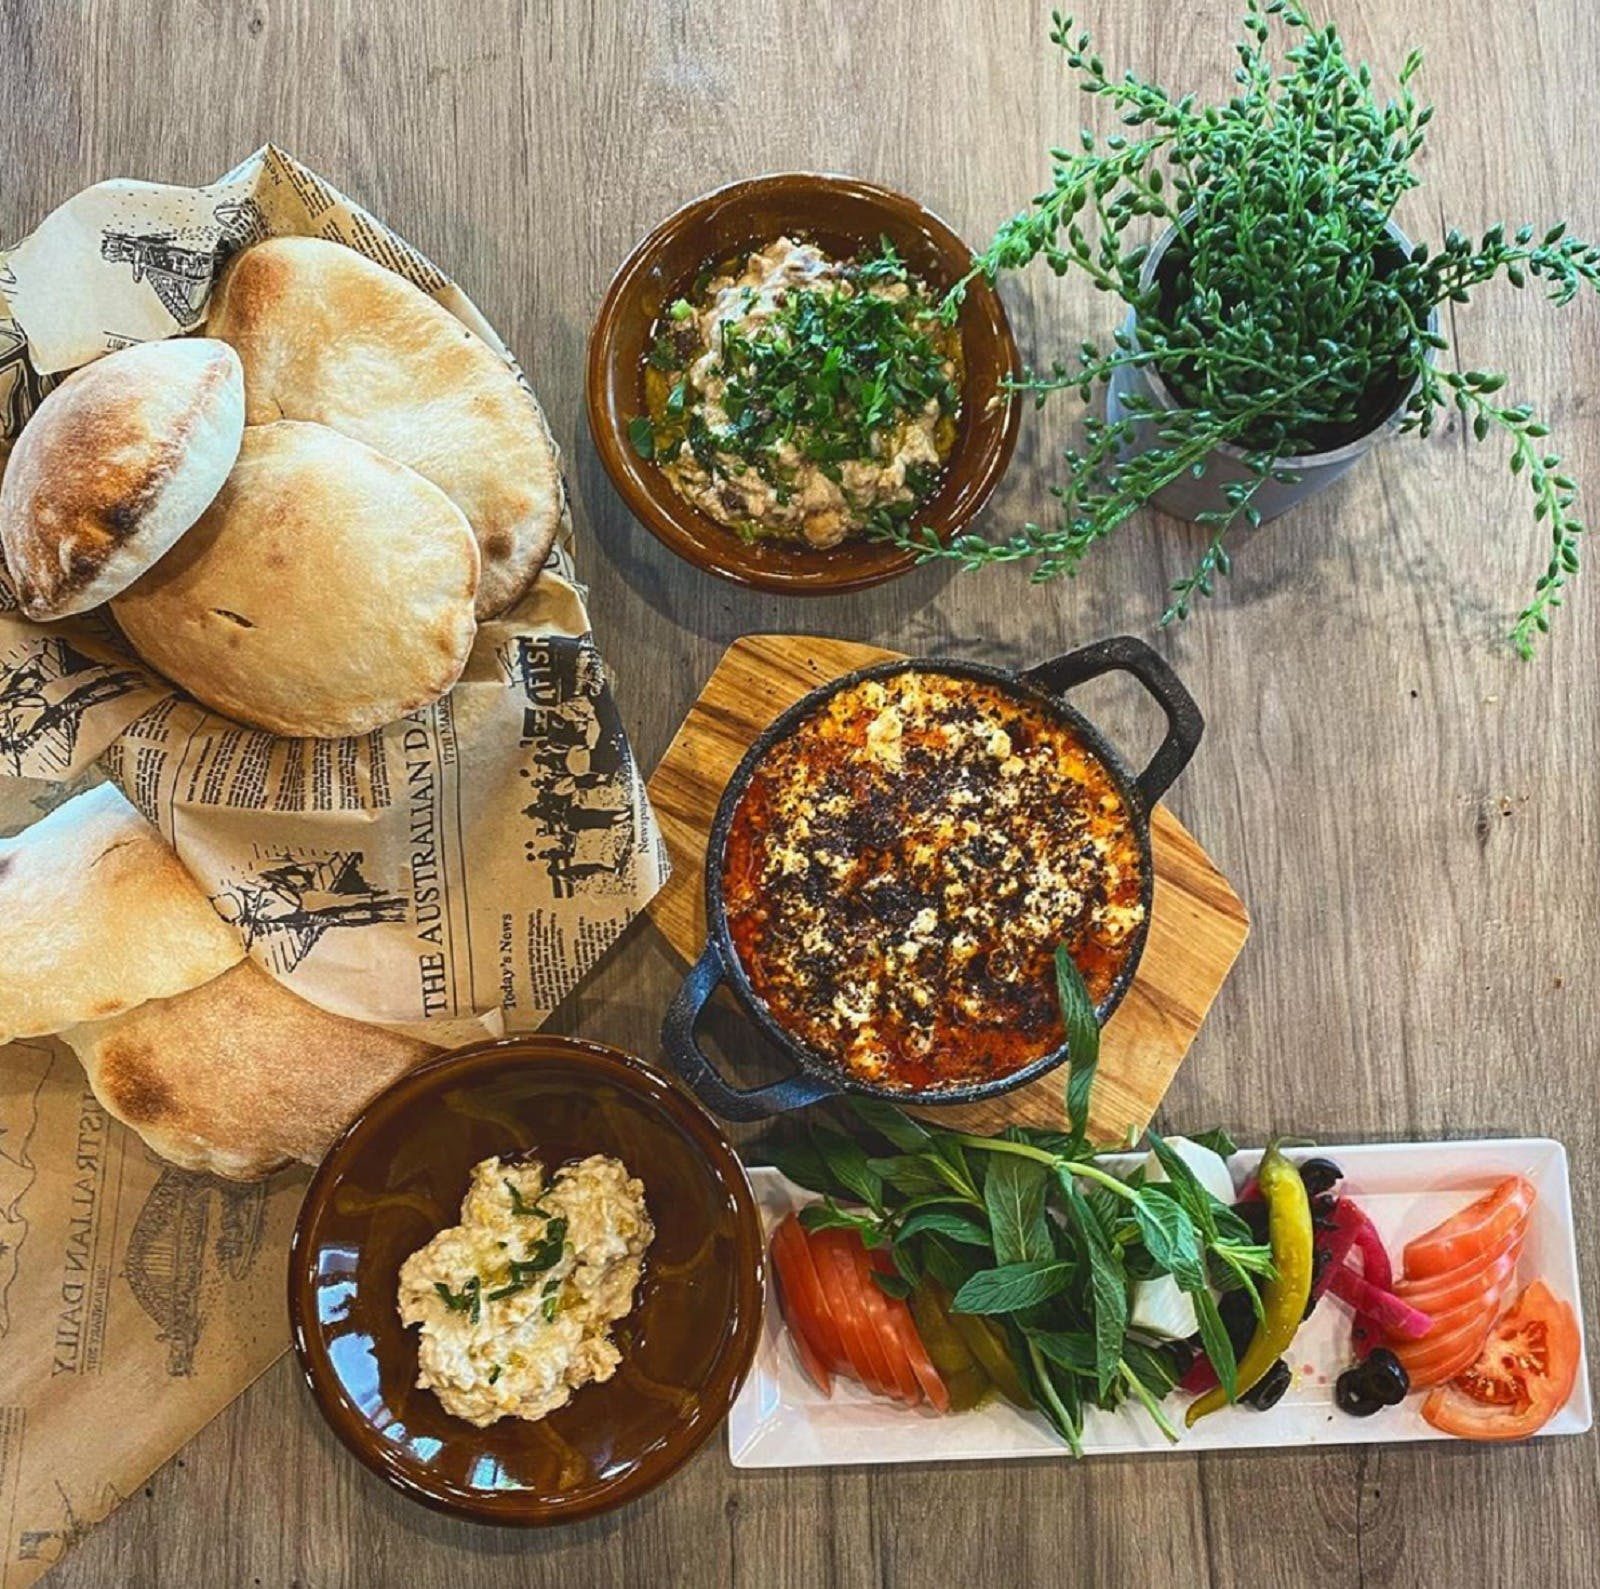 Spread of Lebanese food on wooden table